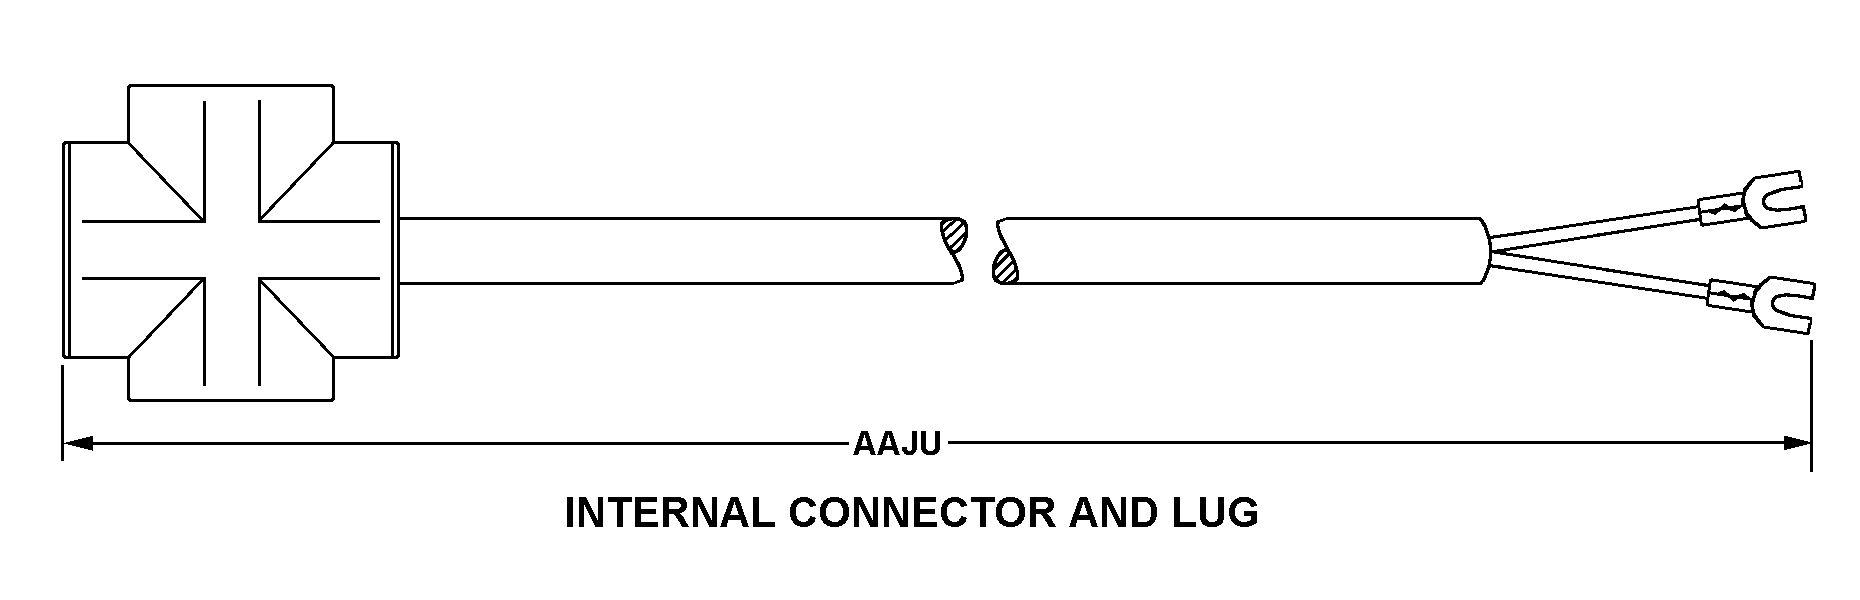 INTERNAL CONNECTOR AND LUG style nsn 6150-00-004-1064